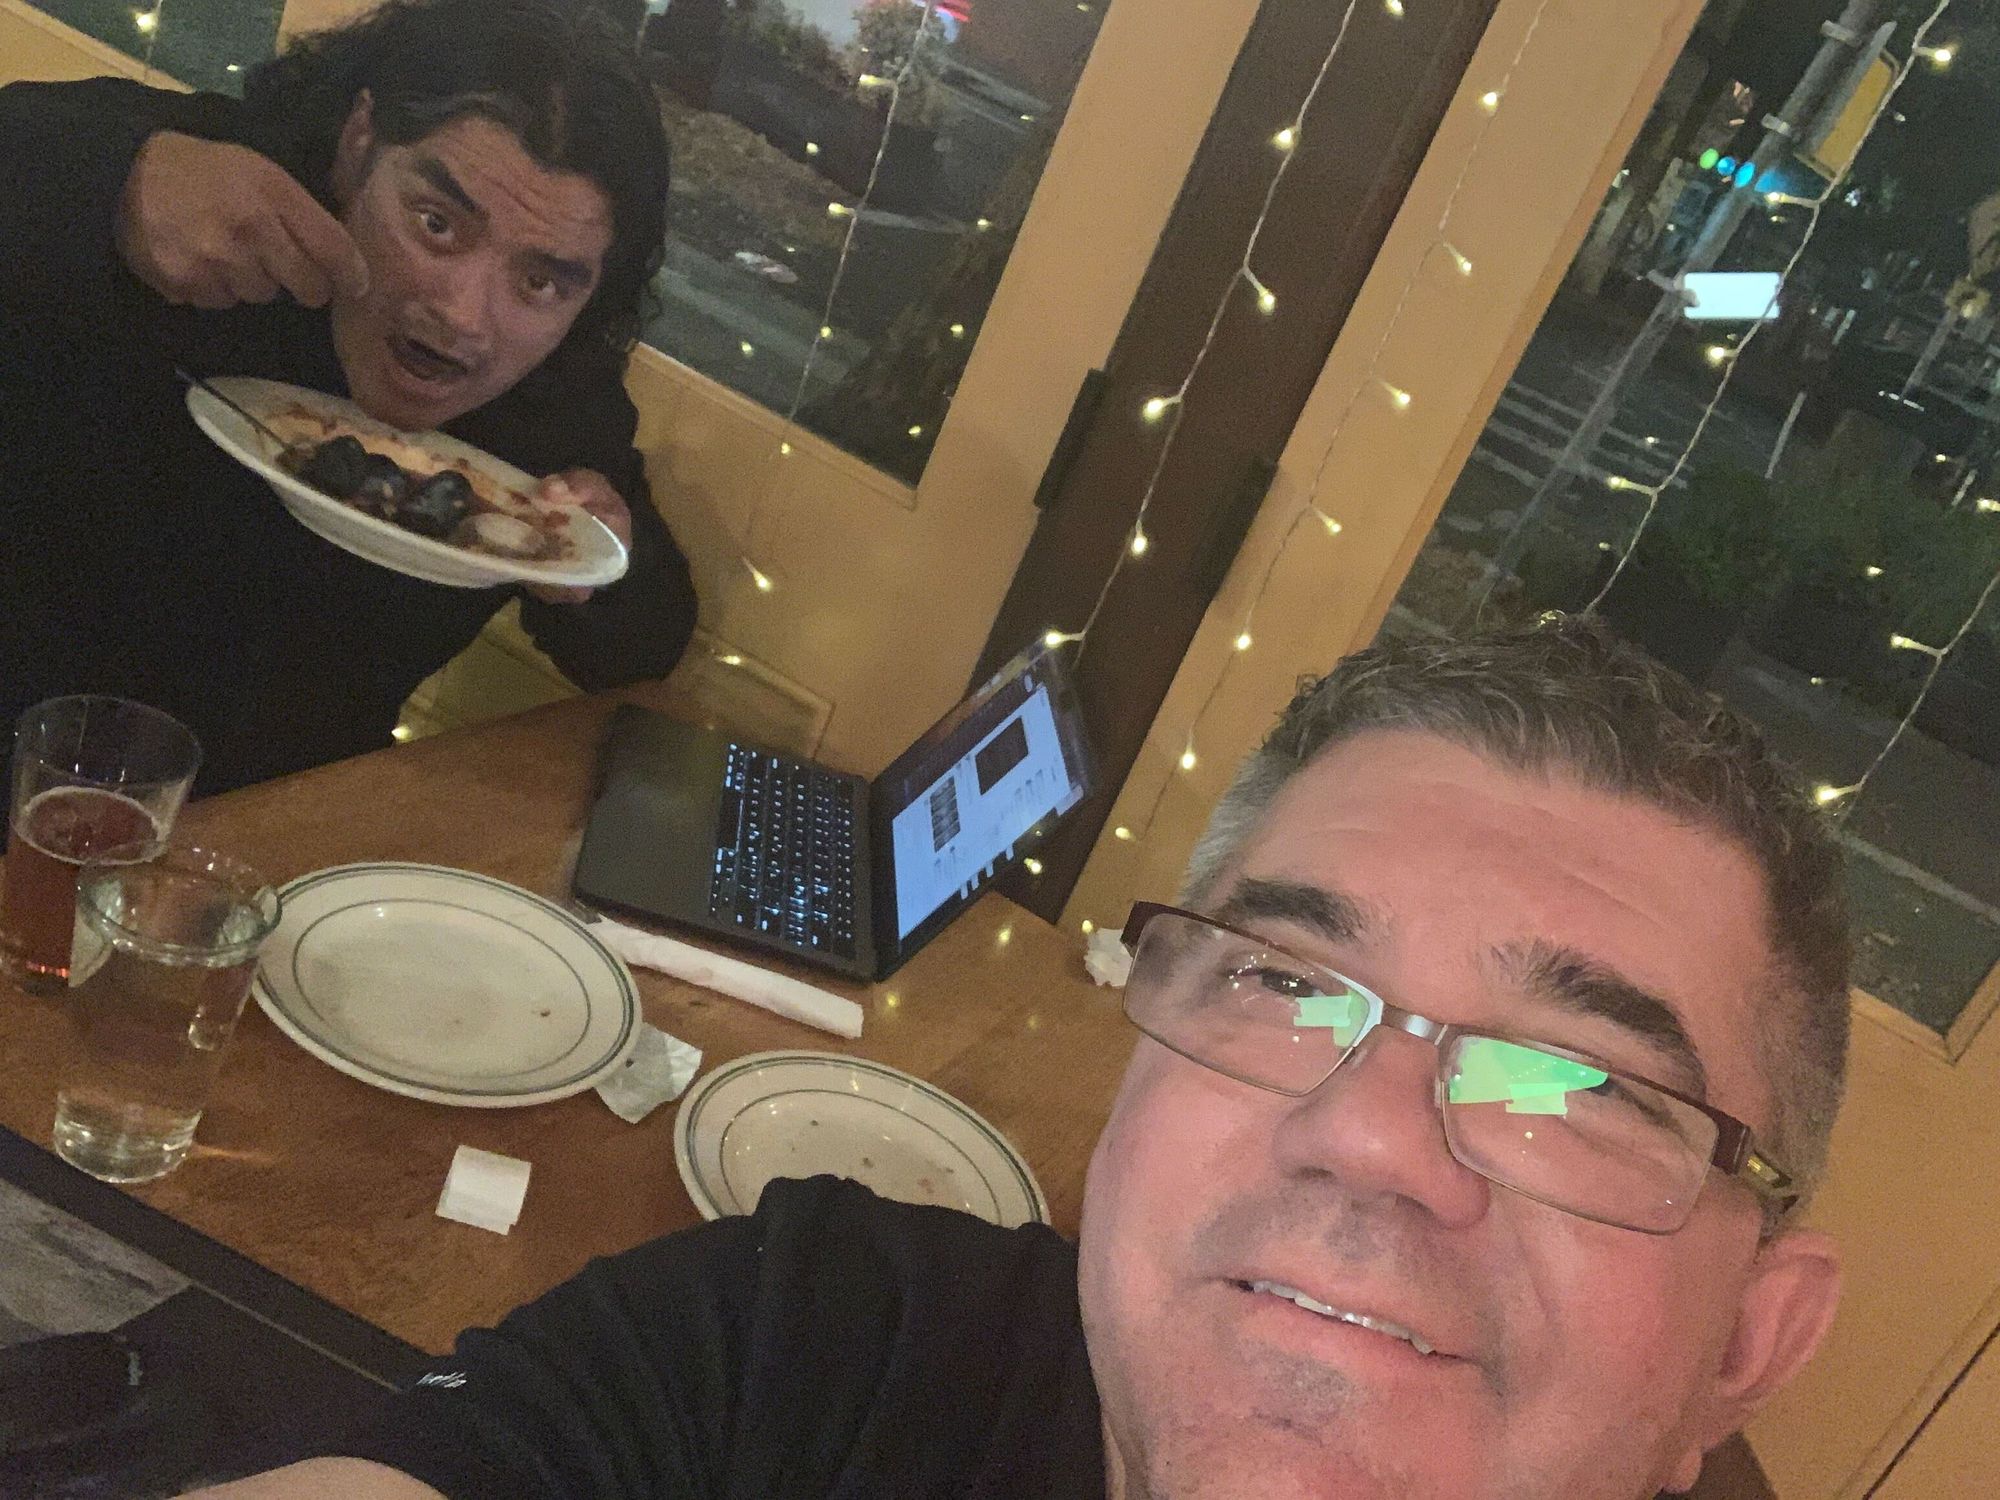 Paul and Jim having dinner together at a restaurant